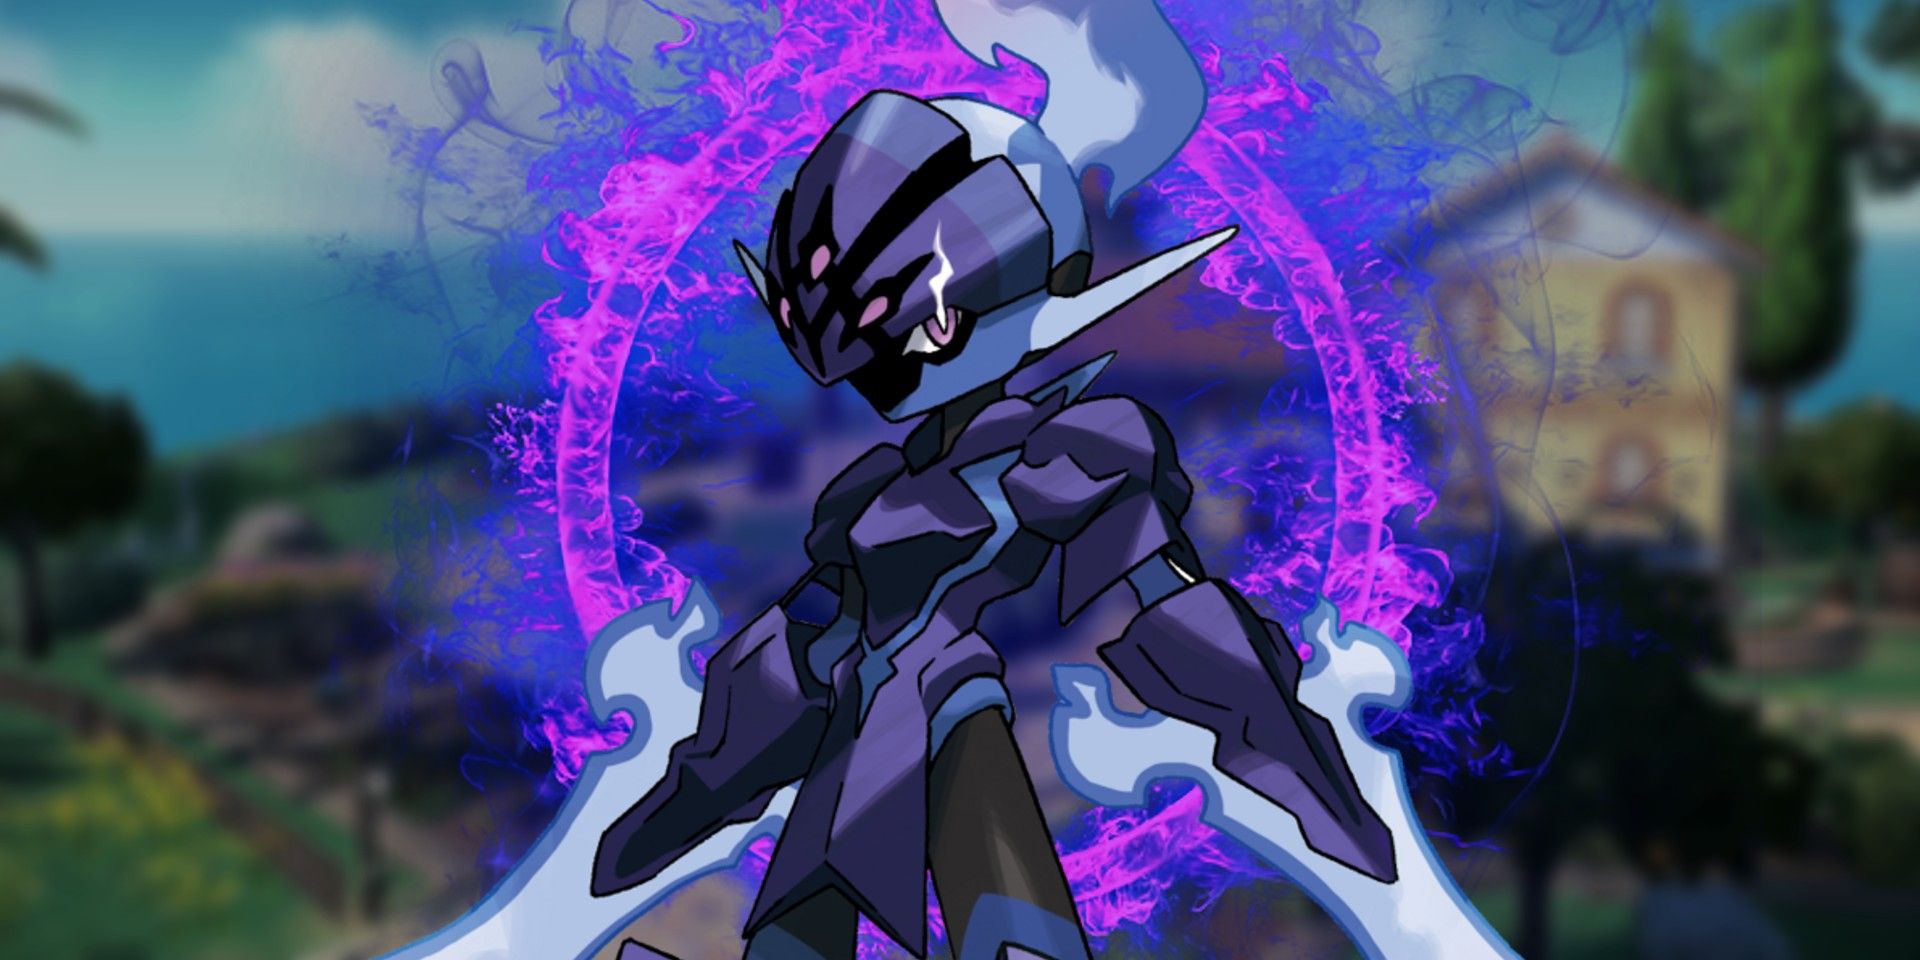 Pokemon Scarlet and Violet's Ceruledge stands in front of a purple circle of flames, with the Paldea region in the background.